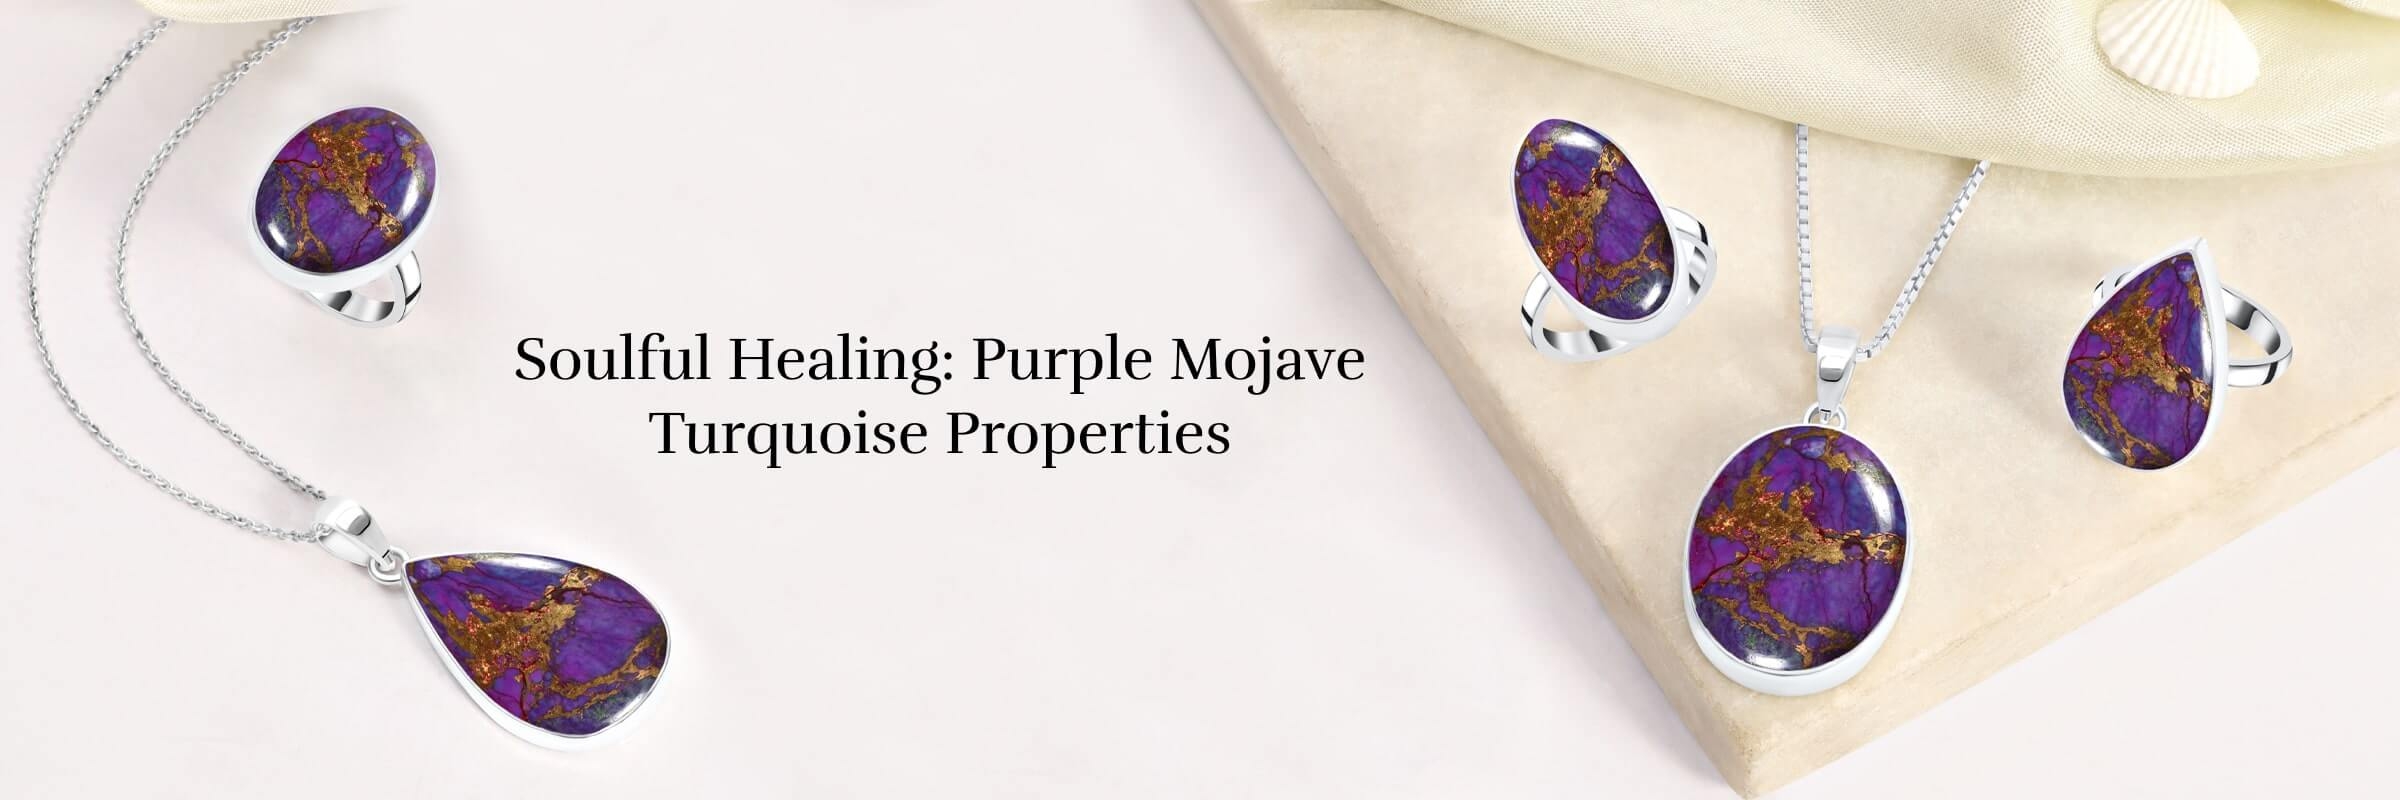 Healing Properties of Purple Mojave Turquoise To Your Mind, Body & Soul